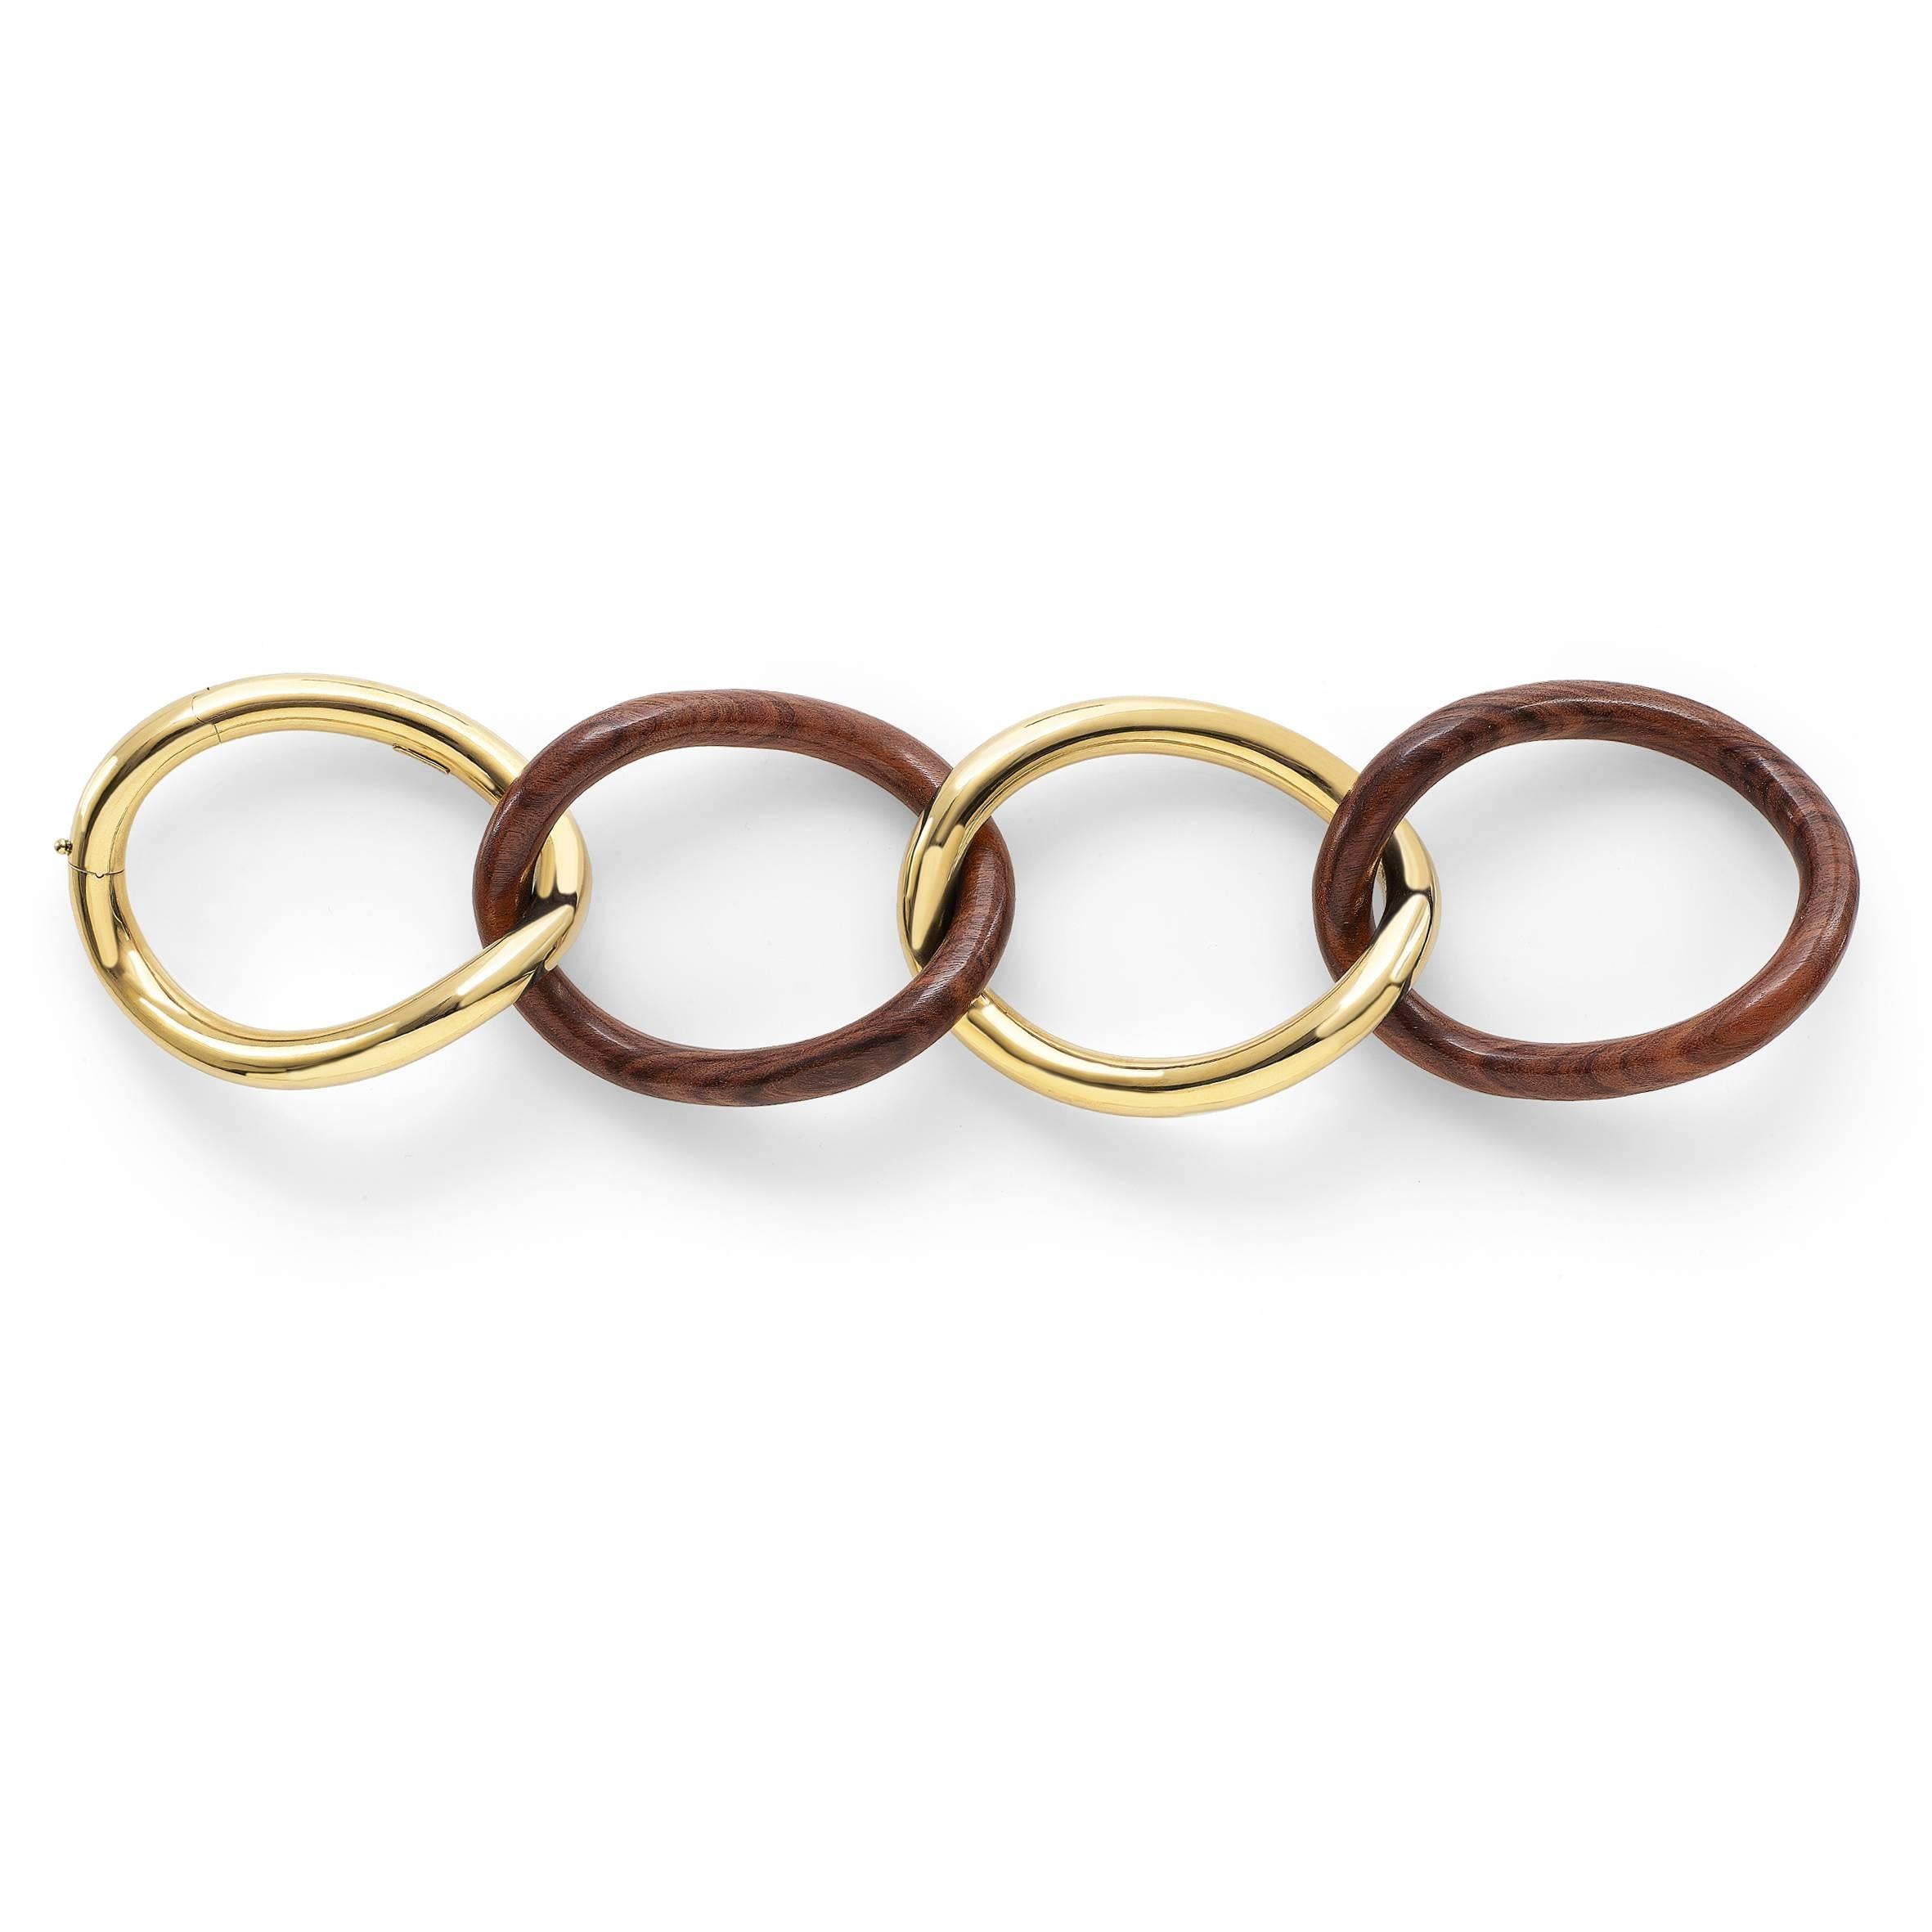 Rose wood groumette bracelet in 18 kt yellow gold 
The rose wood is the most elegant wood and even the most precious.
This iconic collection in Micheletto tradition was originally made only in gold just more or less 10 years ago it became very